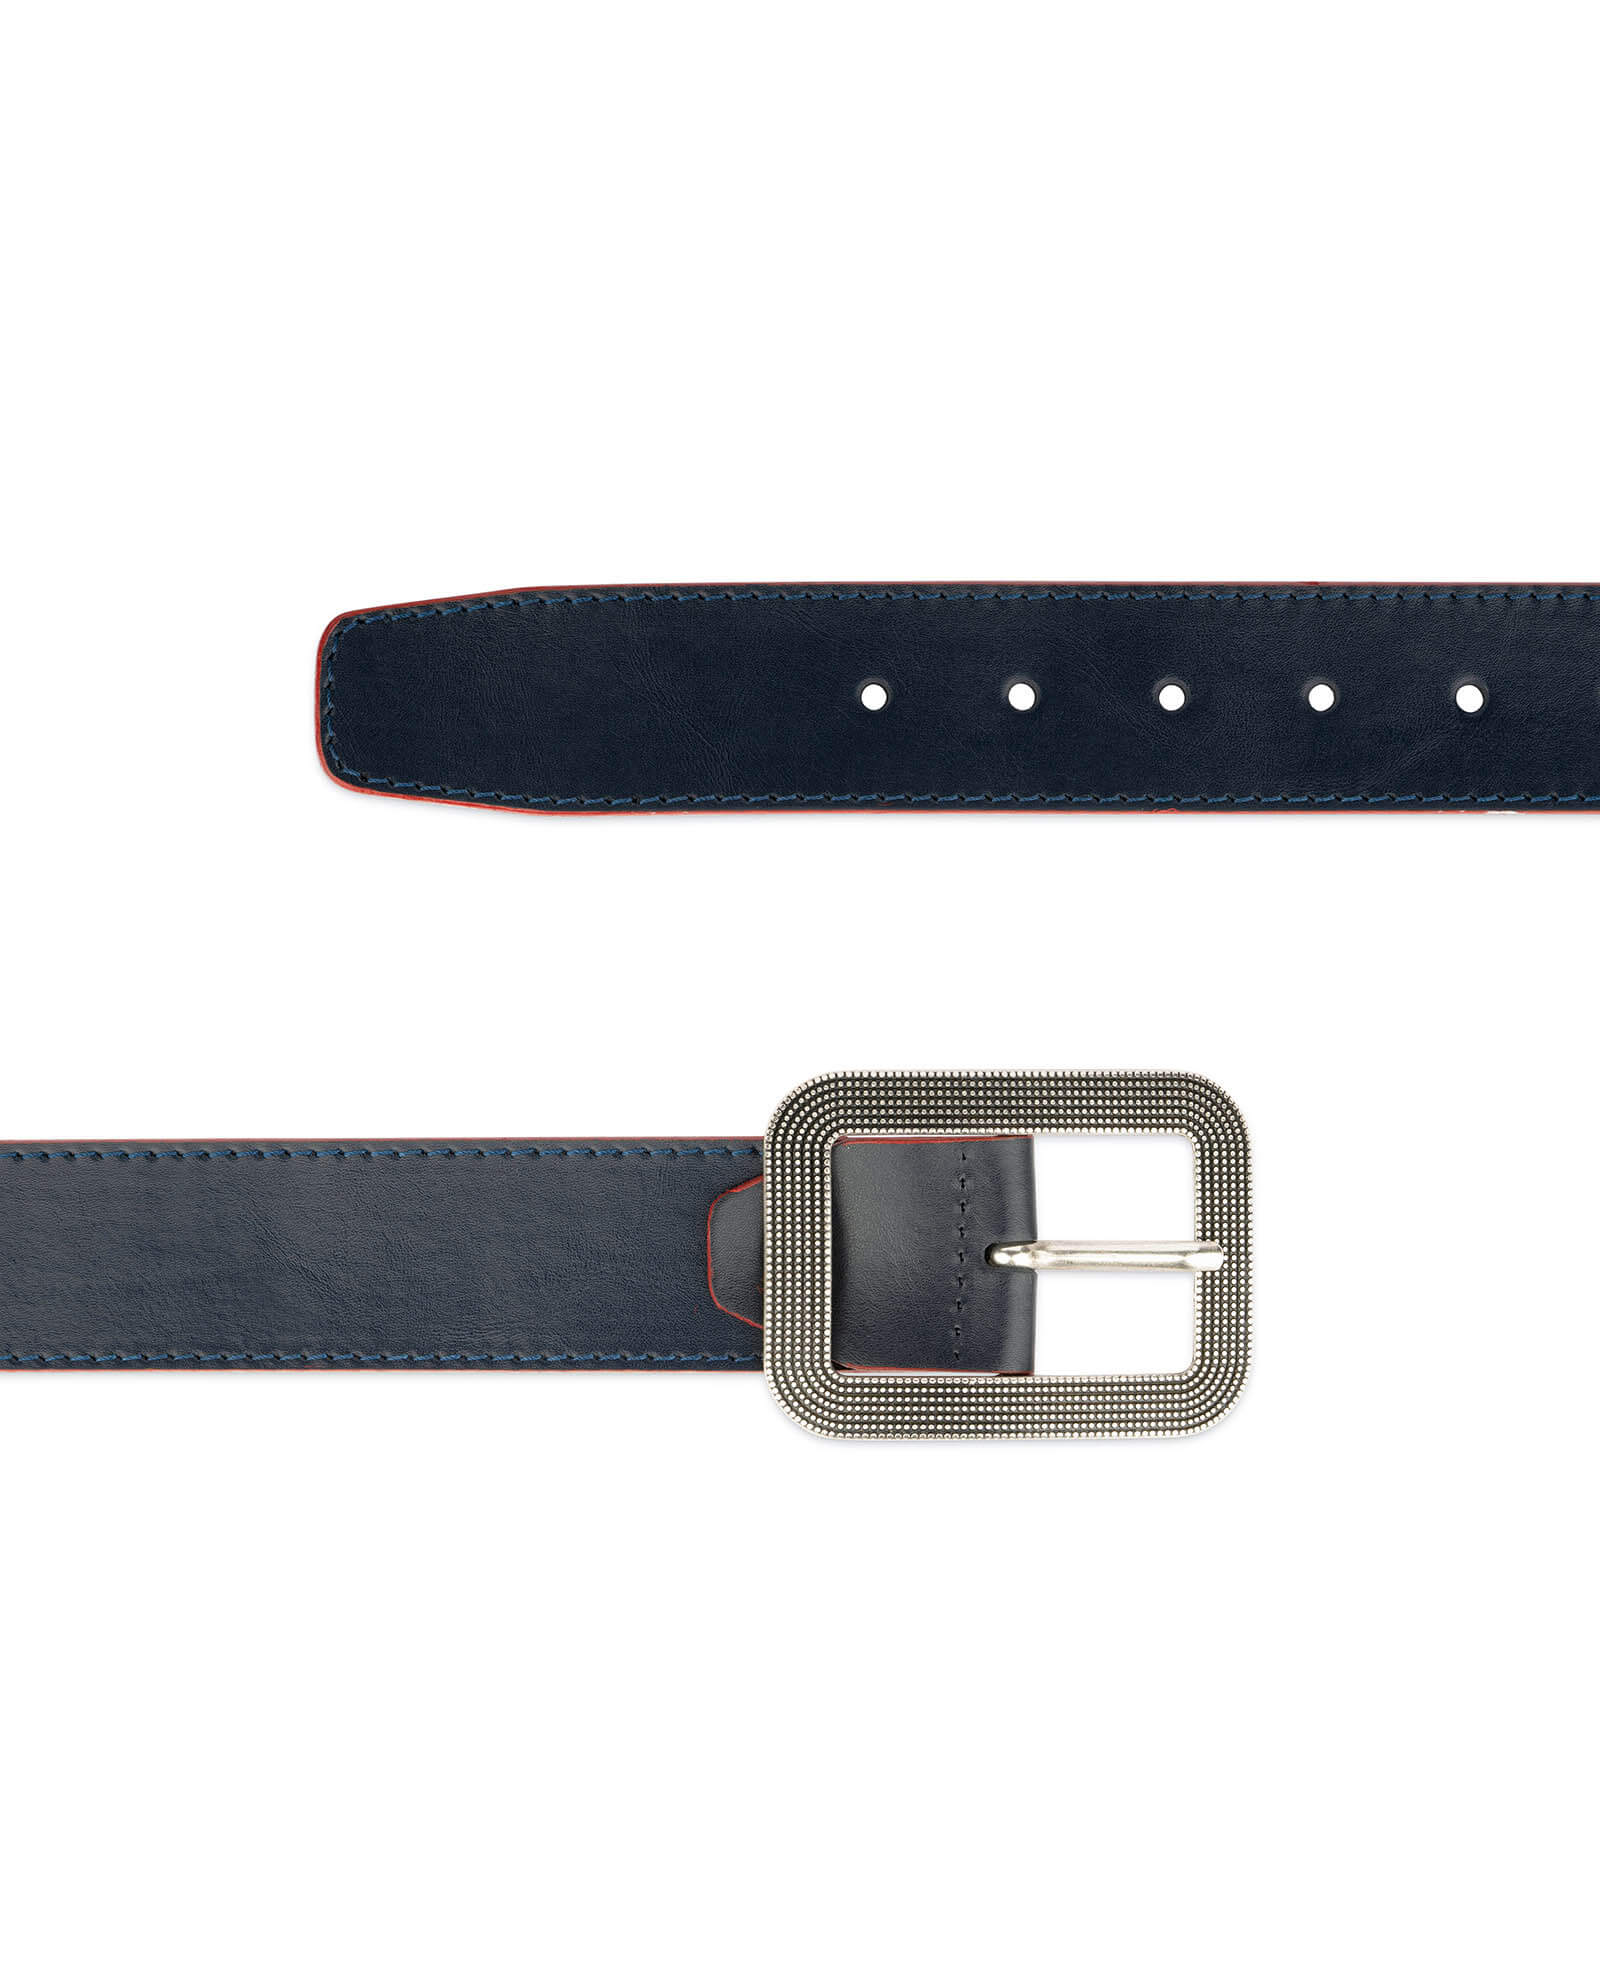 Buy Wide Womens Blue Belt With Rounded Corner Buckle | LeatherBelts